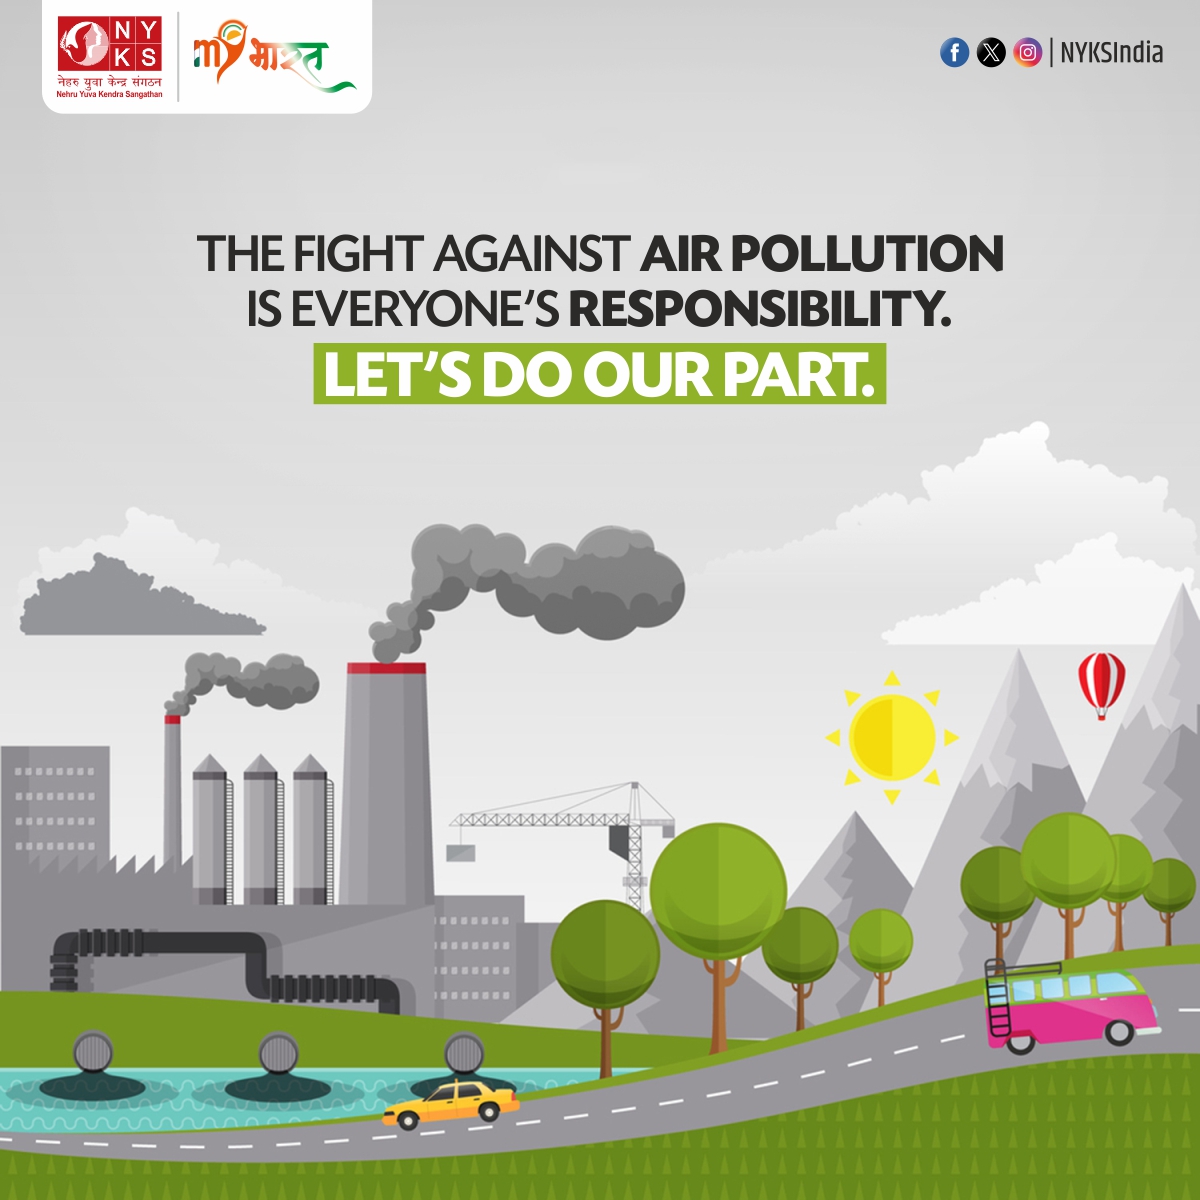 Clean air starts with us all. 🌍 Let's each play our part in the fight against air pollution. 

#CleanAirNow #StopAirPollution #NYKS